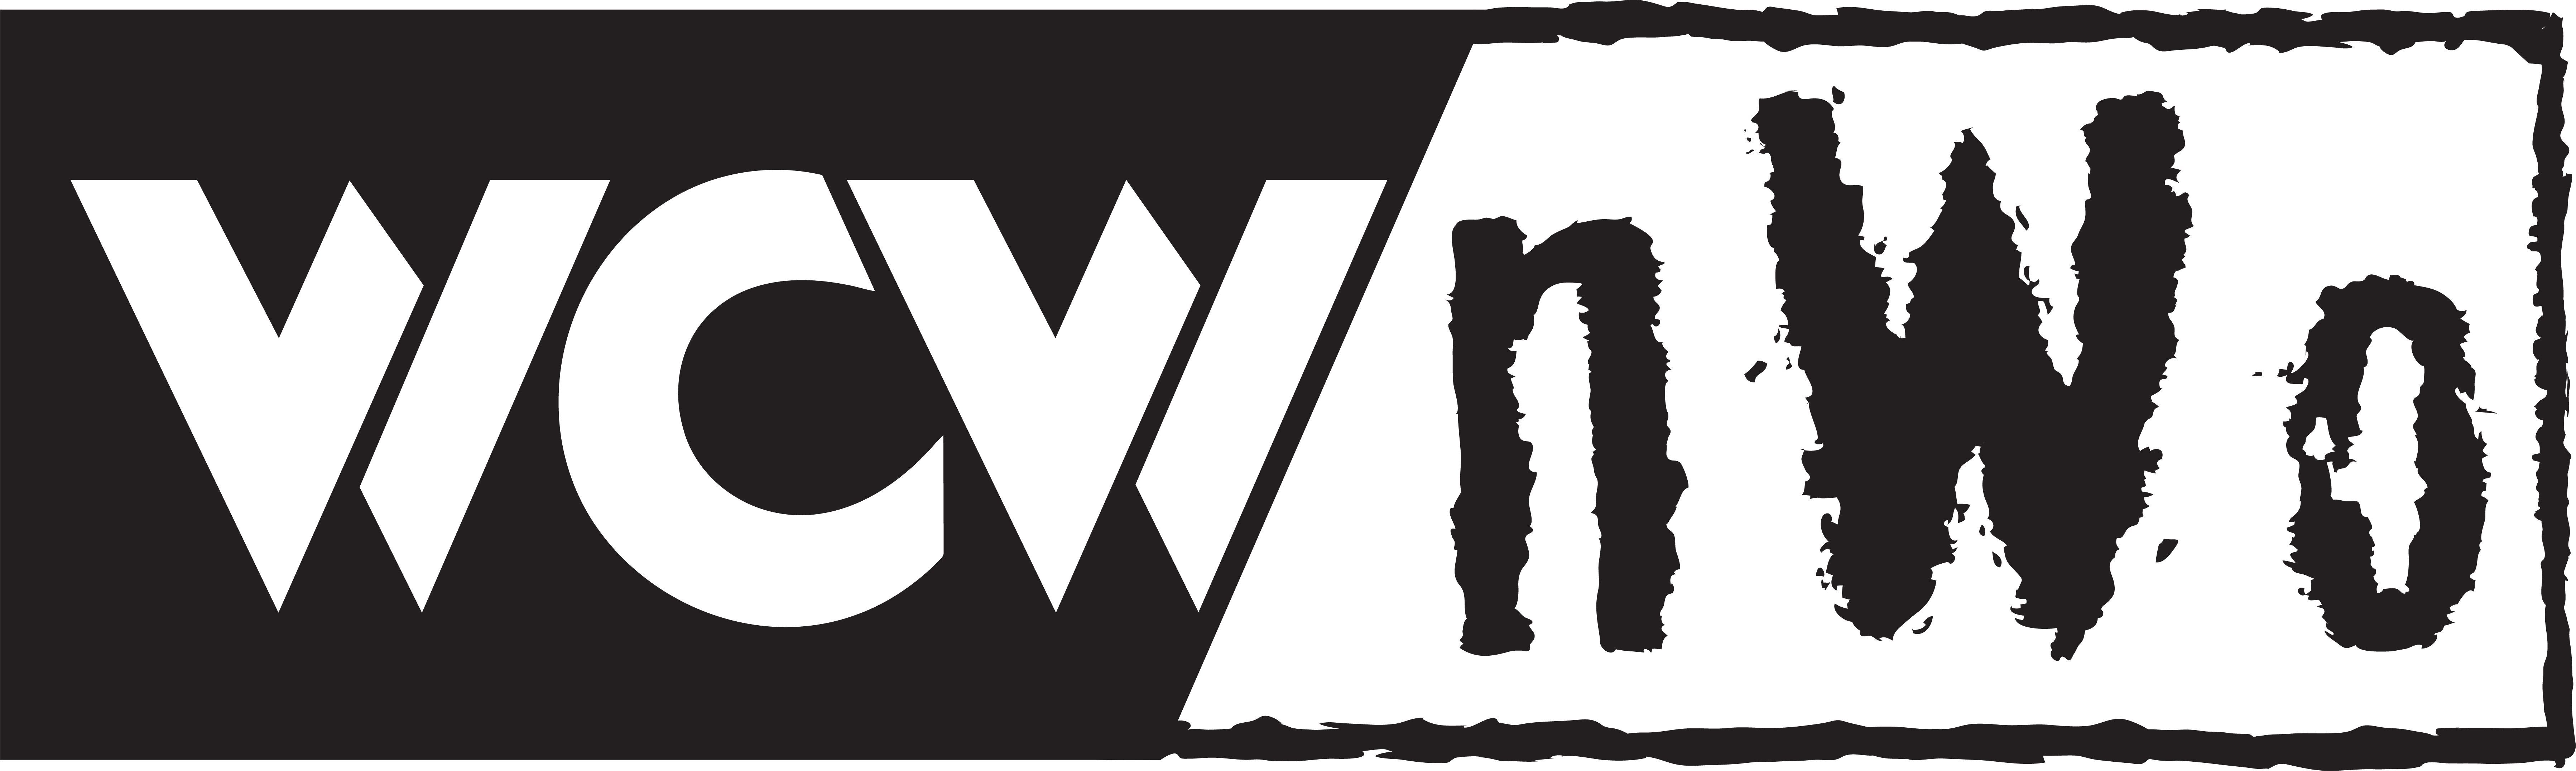 Free download WCW nWo Logo by B1ueChr1s [7192x2153] for your Desktop, Mobile & Tablet. Explore WCW NWO Wallpaper. WCW NWO Wallpaper, Wcw Wallpaper, Wcw Wallpaper